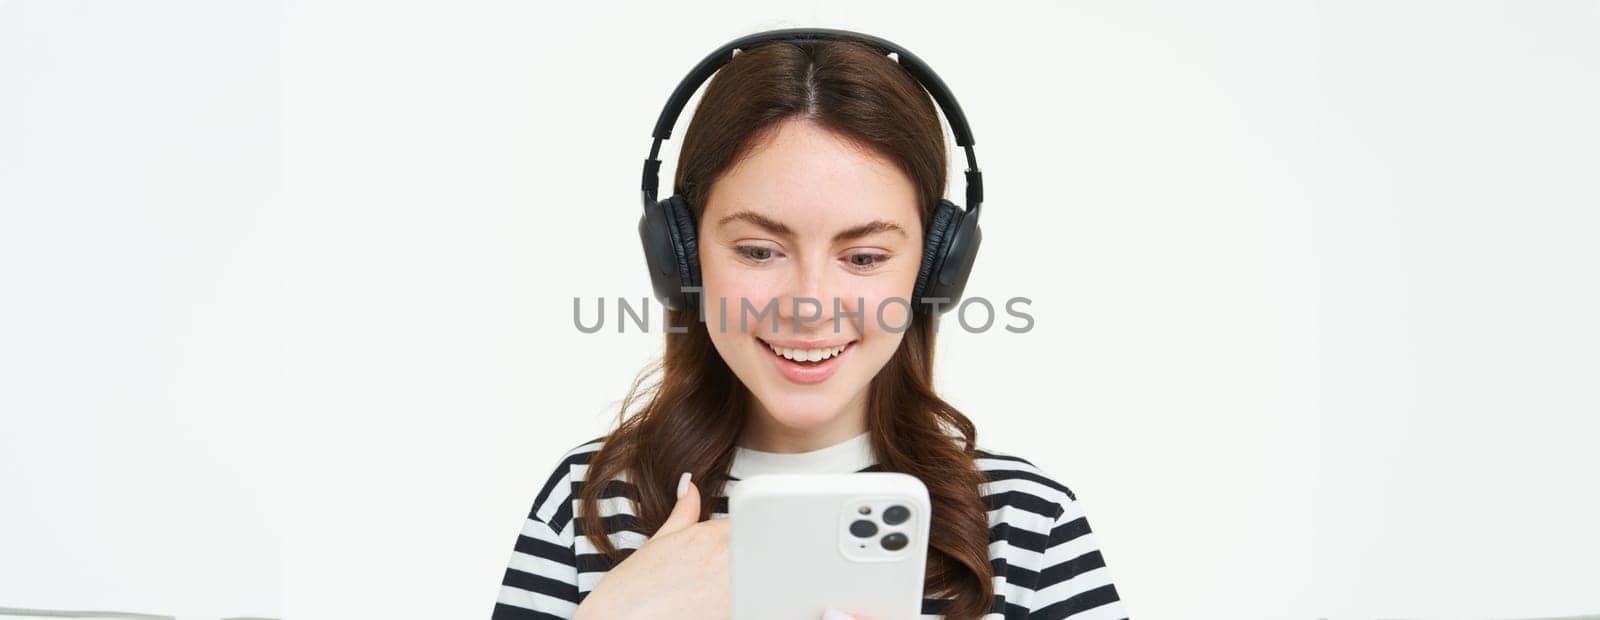 Image of young woman in headphones, using smartphone and laughing, watching video on mobile phone, listens to music on streaming service app, white background.